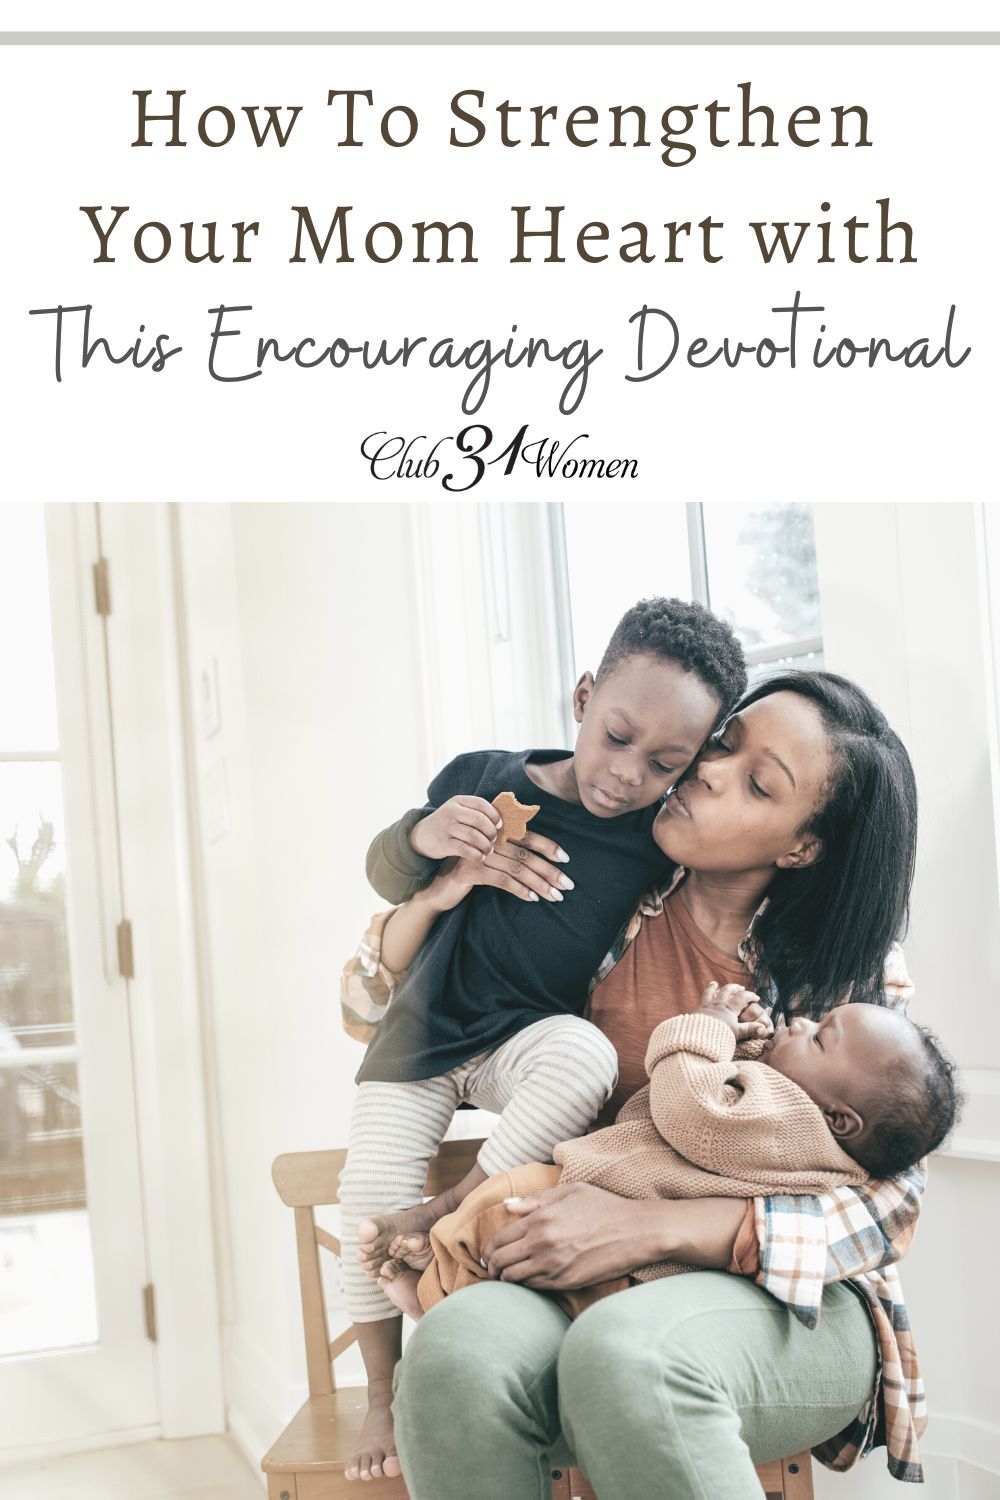 As a mom, we need lifegiving encouragement. When we can receive that, we can be lifegiving mothers. This resource will touch your heart and spirit as a mom! via @Club31Women